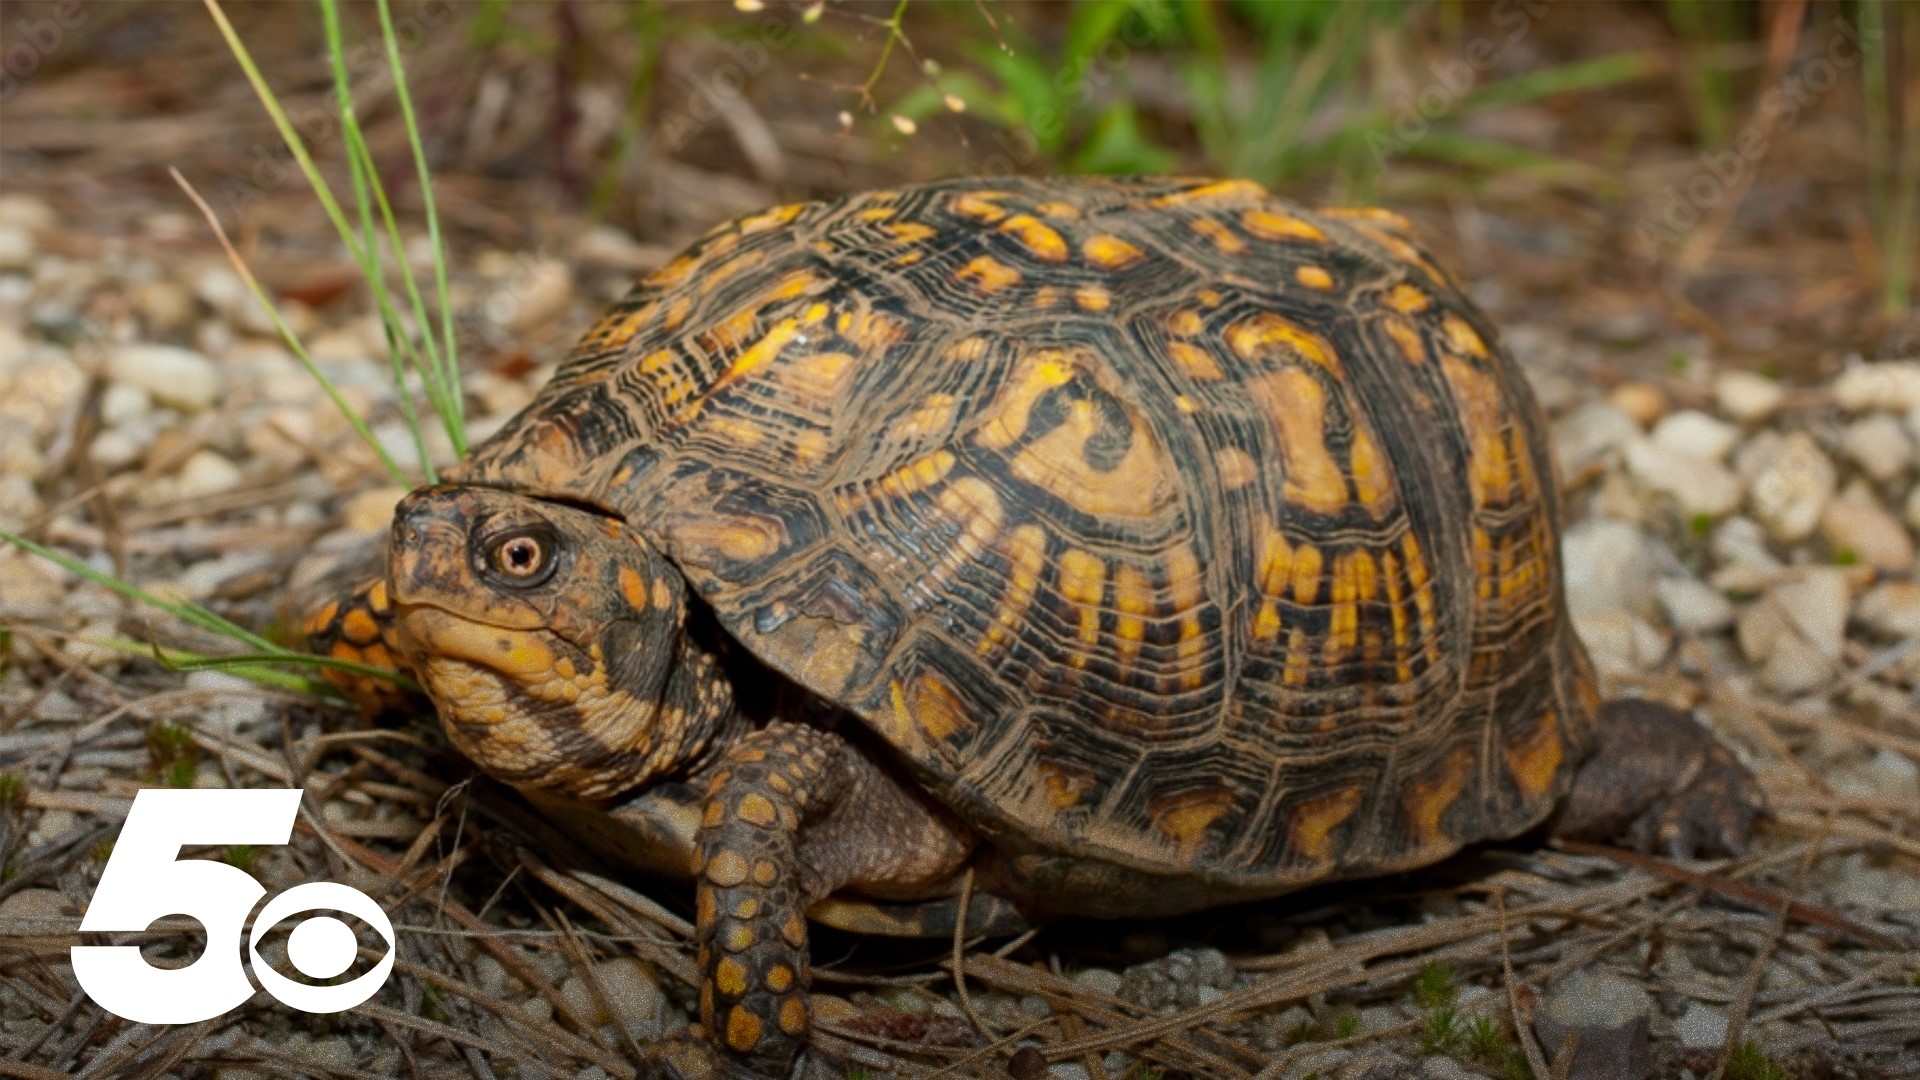 Box turtles are on the move all over Arkansas, with many found alongside roads in rural and suburban areas. Here are some tips on what to do if you come across one!